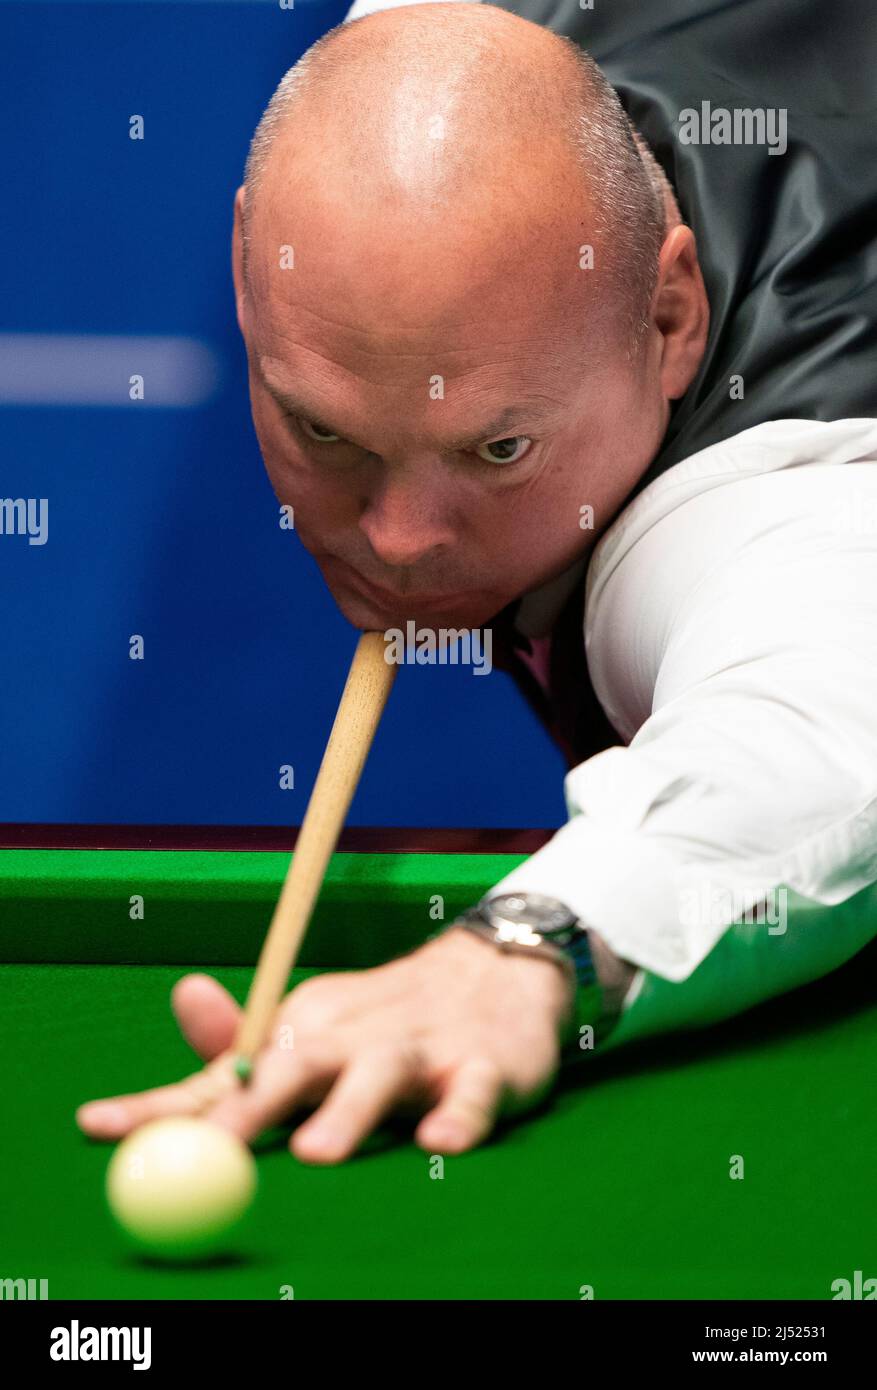 Stuart Bingham during his match against Lyu Haotian during day four of the Betfred World Snooker Championships at The Crucible, Sheffield